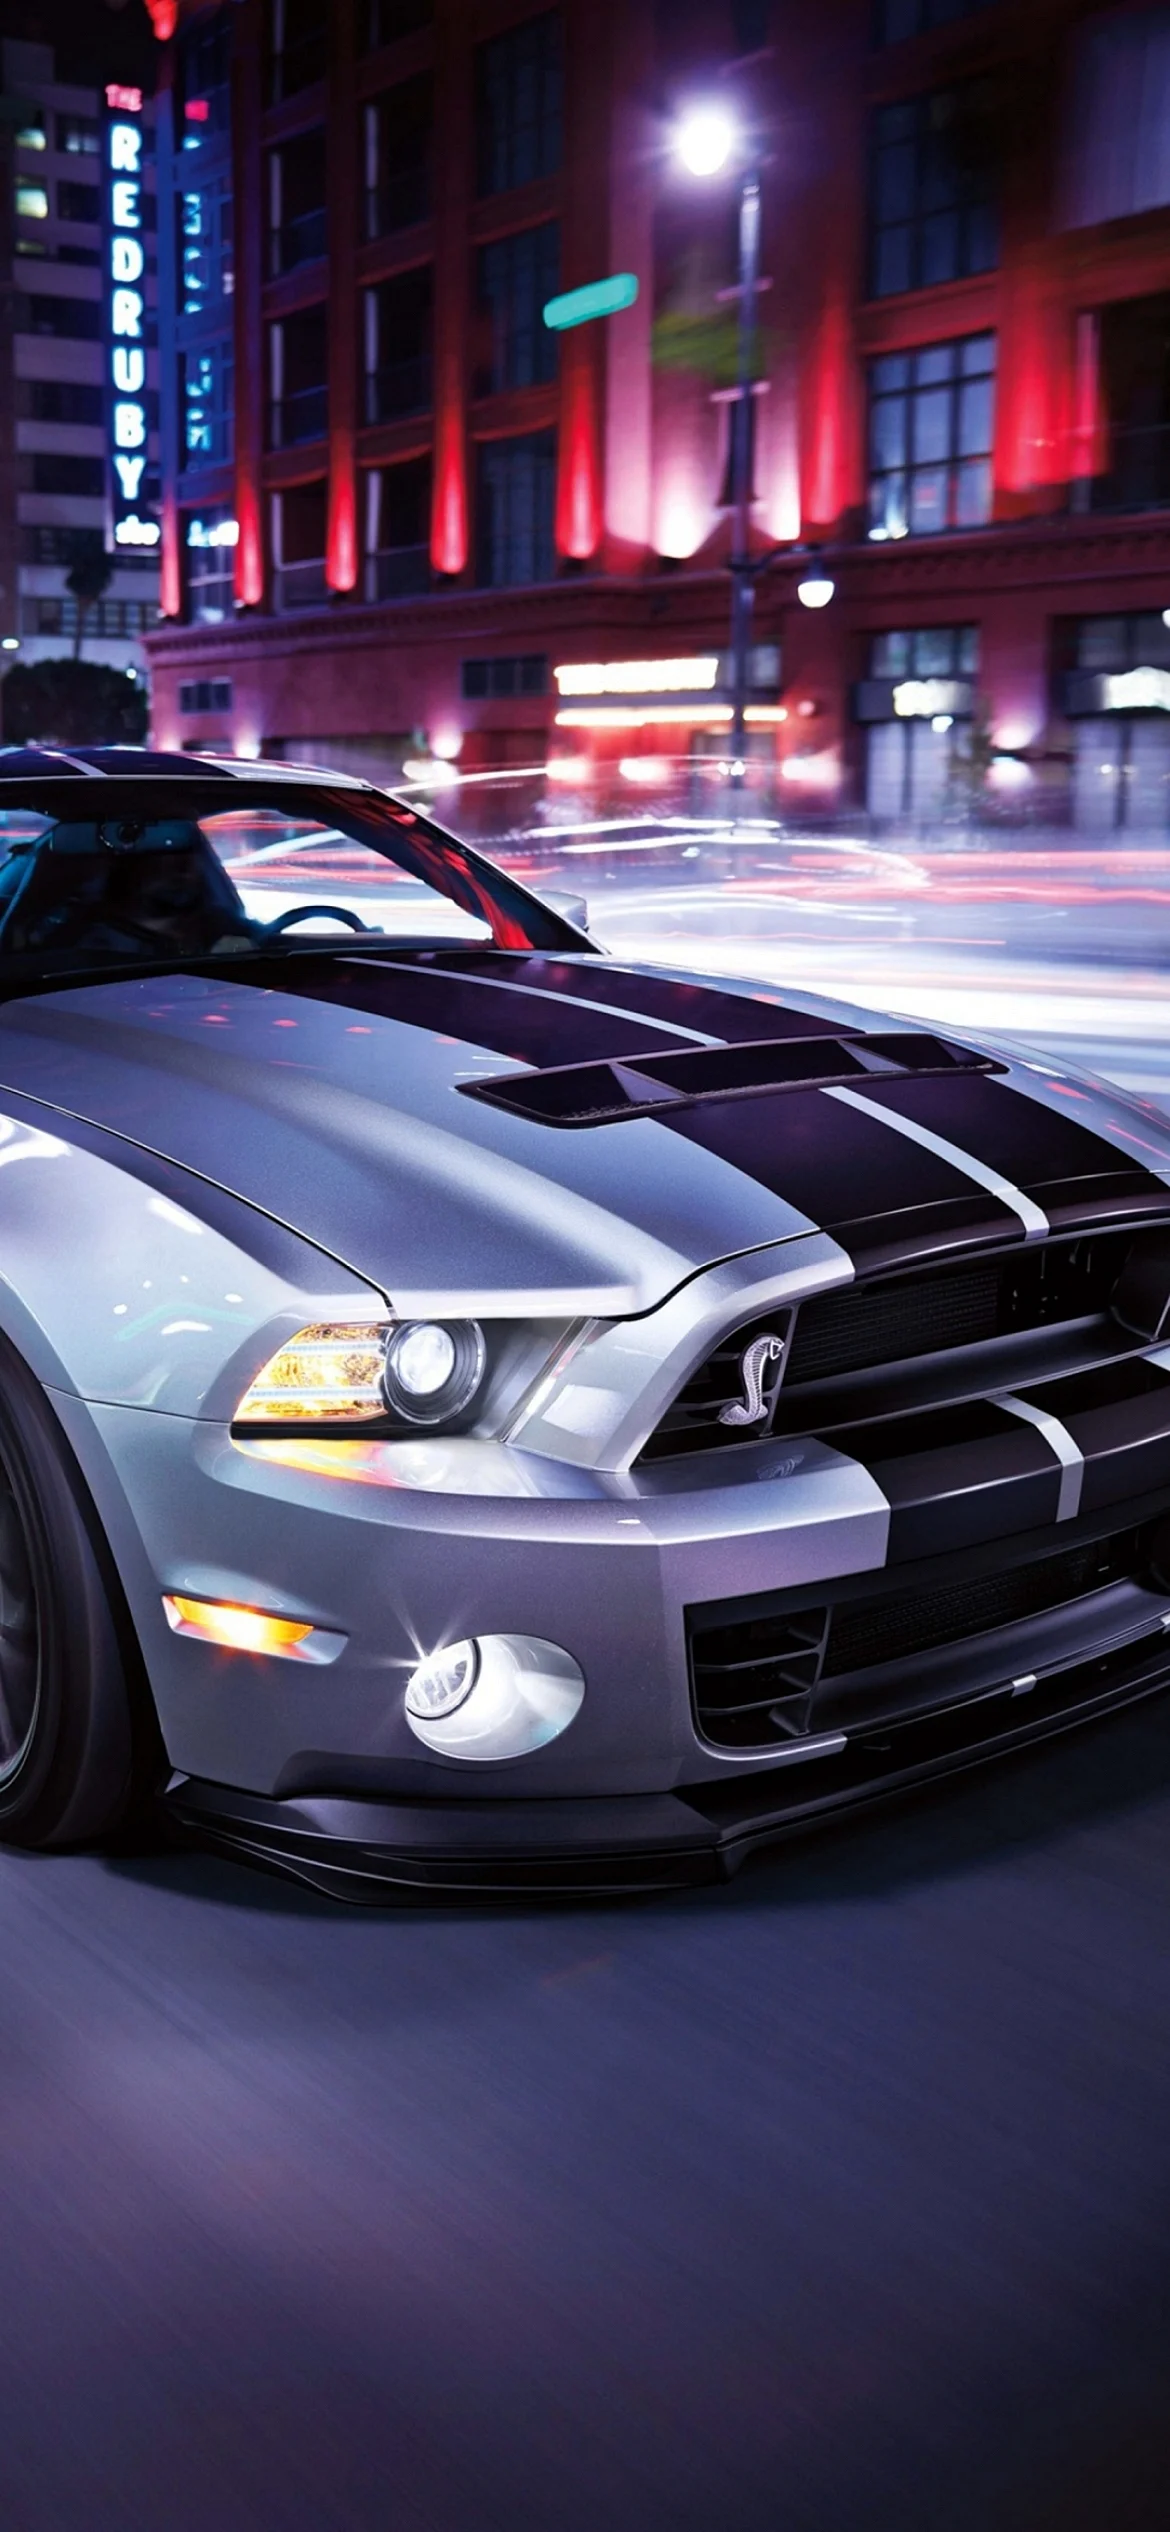 Ford Shelby Gt500 Wallpaper for iPhone 12